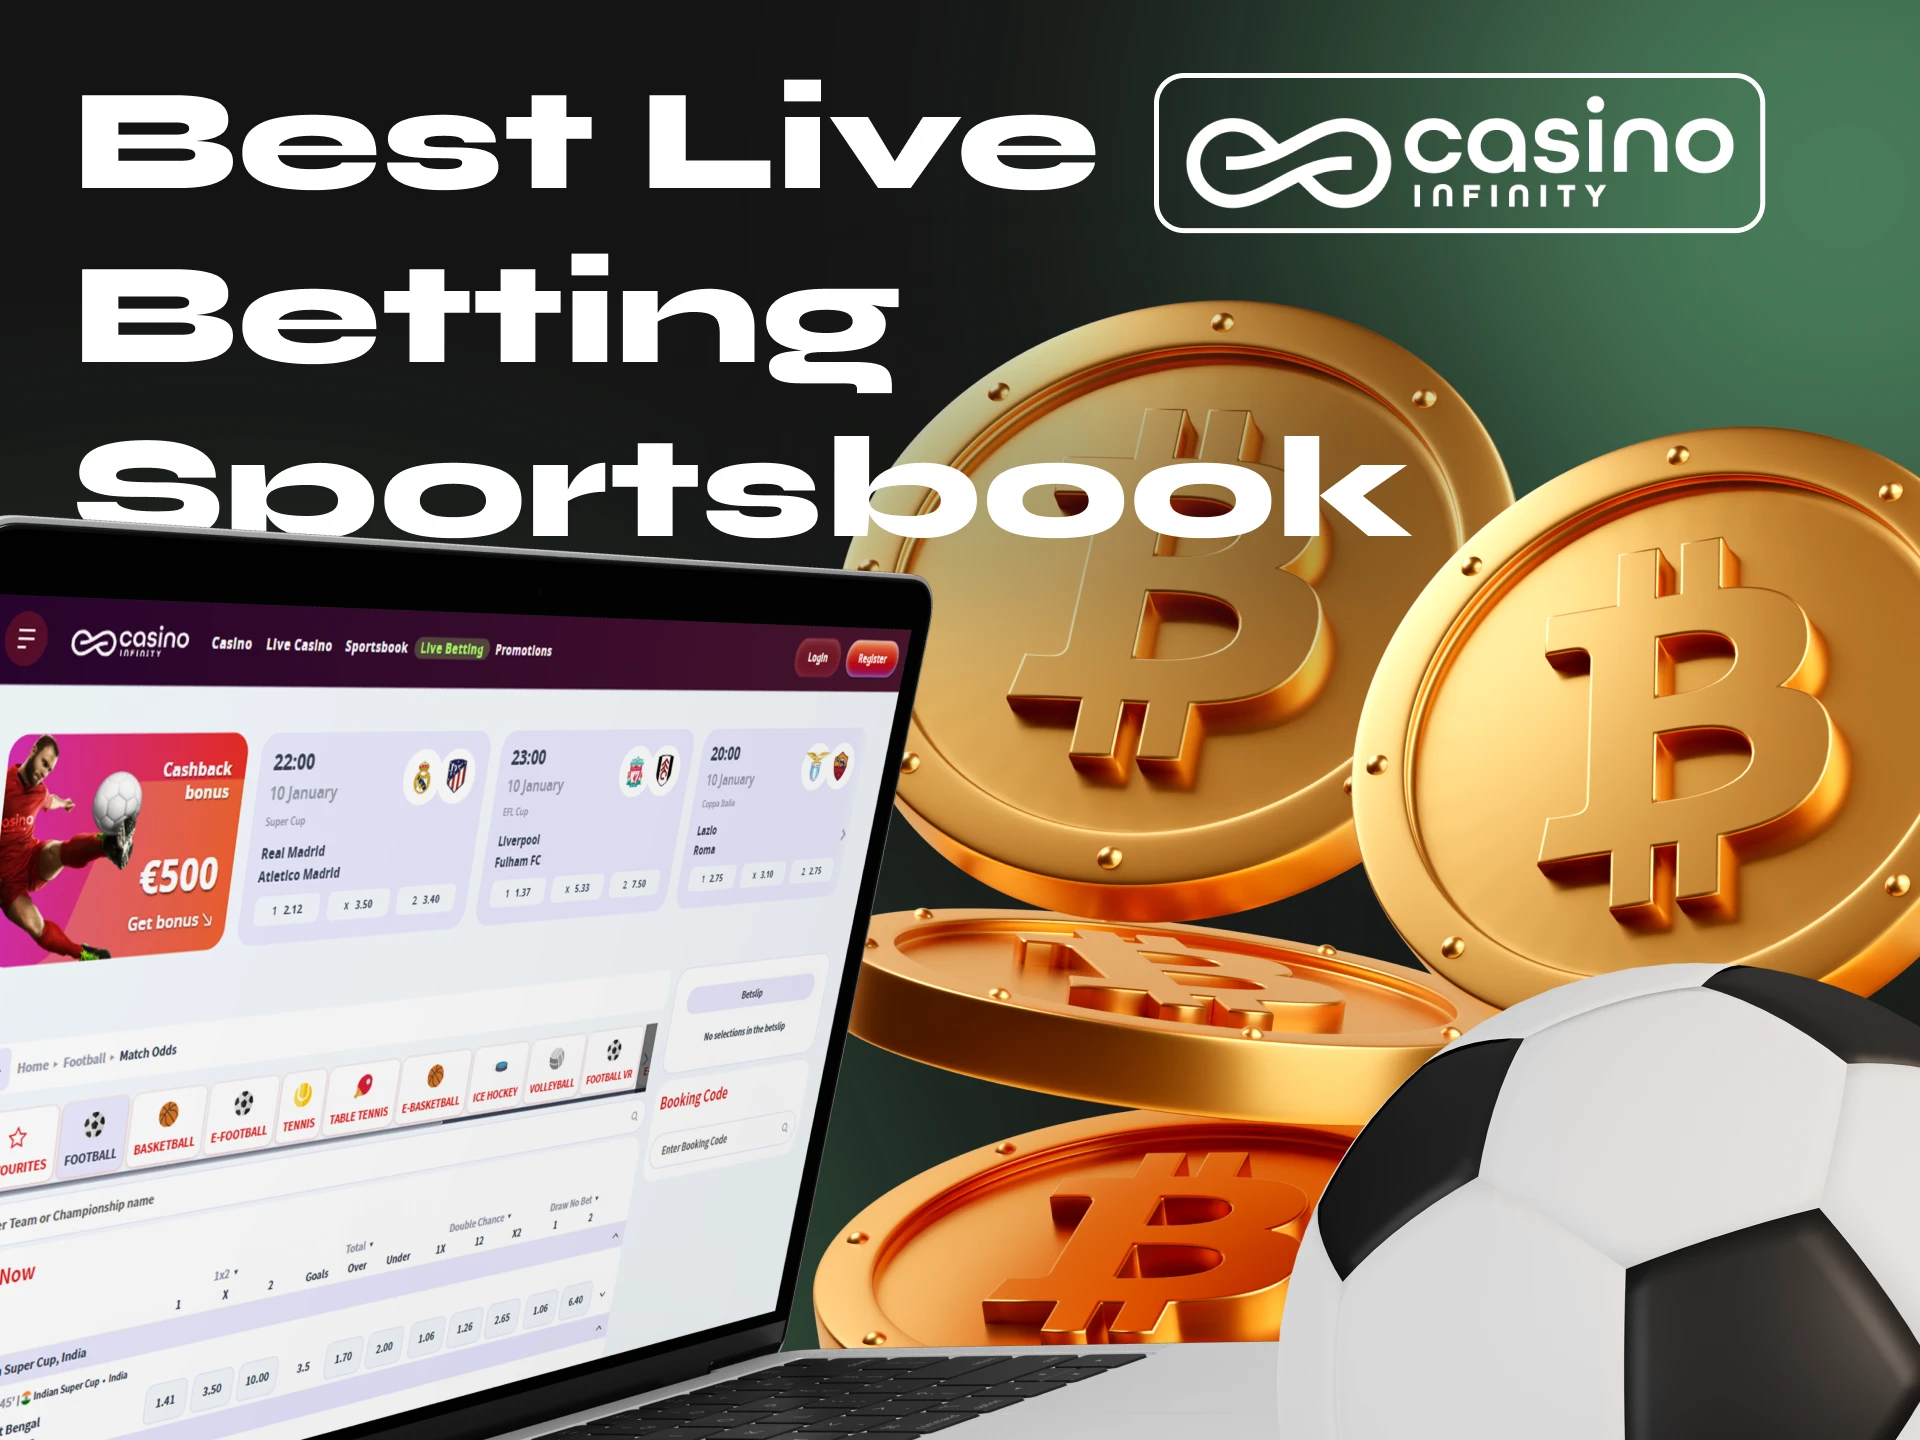 Place your bets in the live casino section of Casino Infinity.